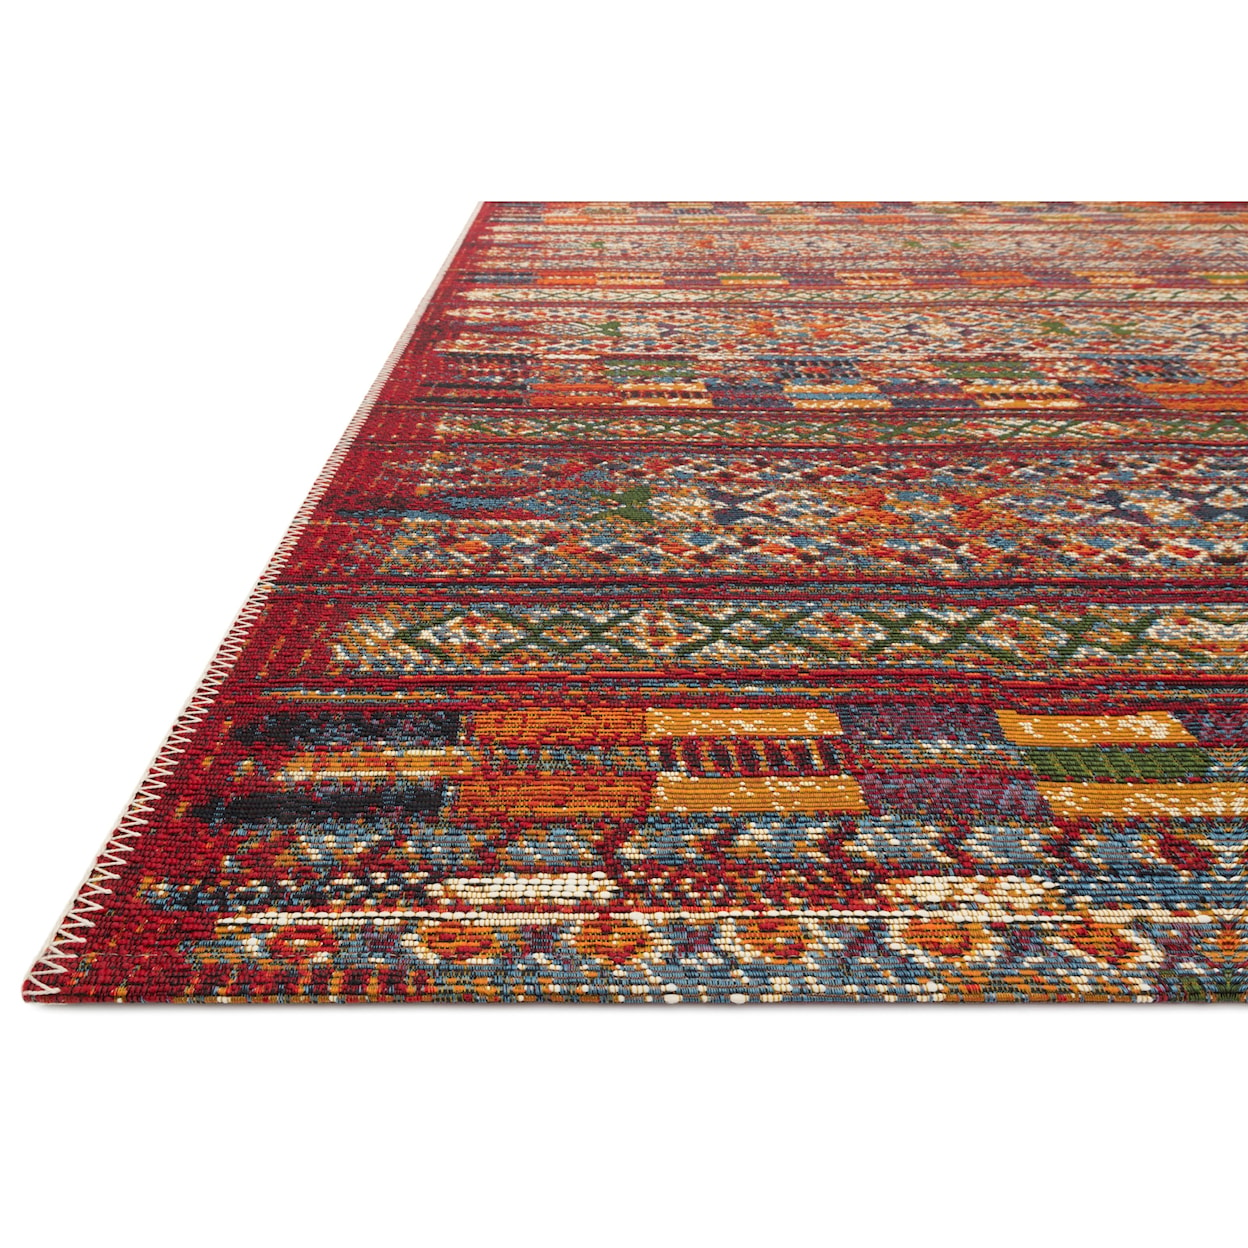 Reeds Rugs Mika 3'11" x 5'11" Red / Multi Rug